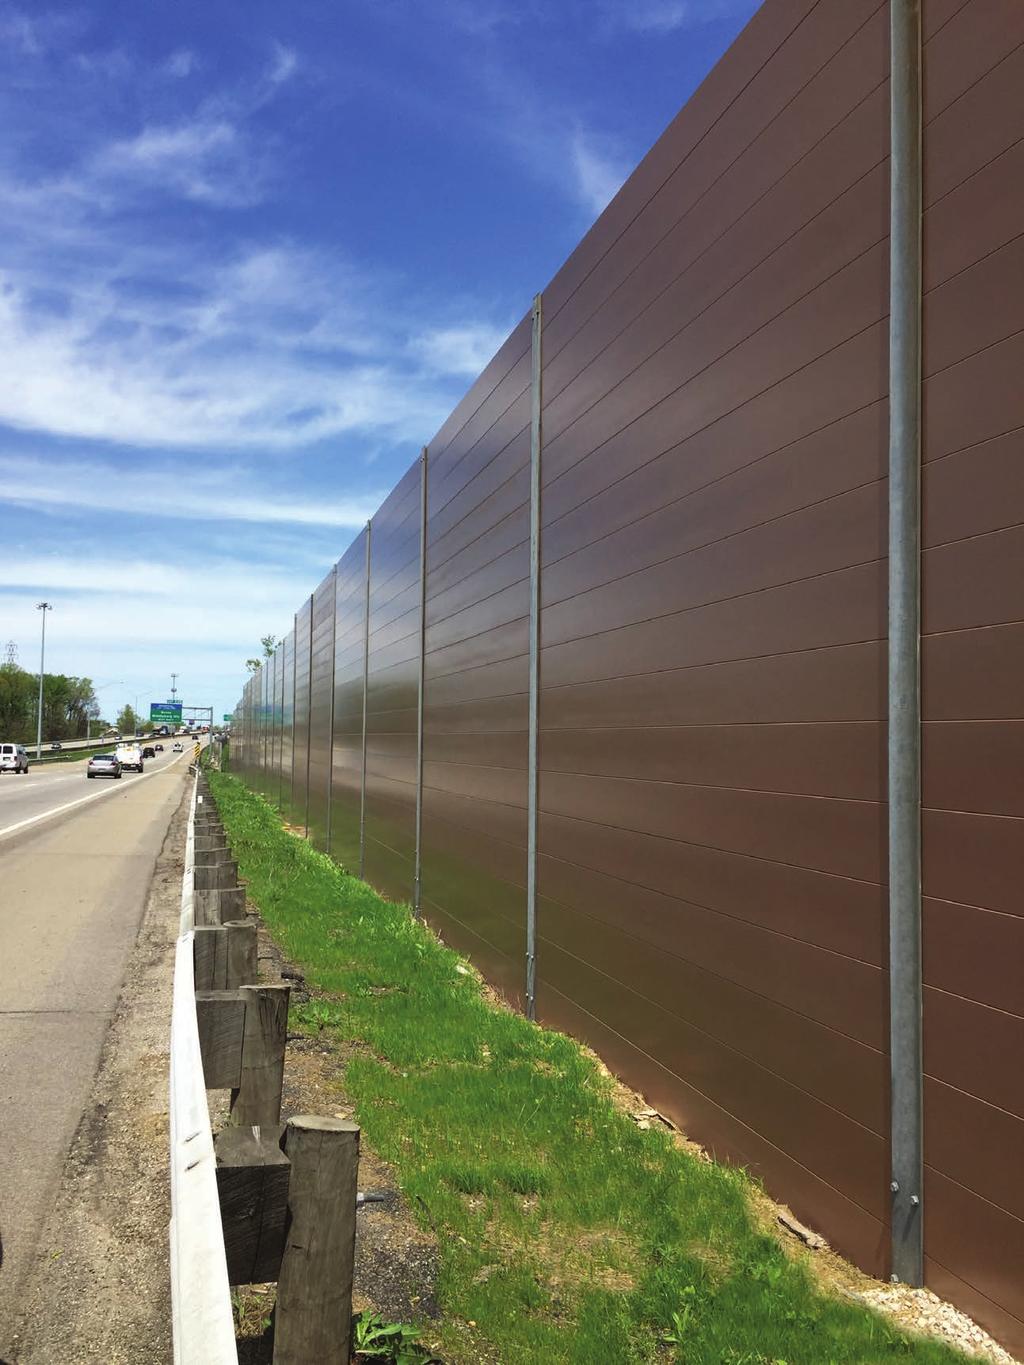 AcoustaShield is designed for long-term outdoor durability, vandal resistance, and ease of installation.